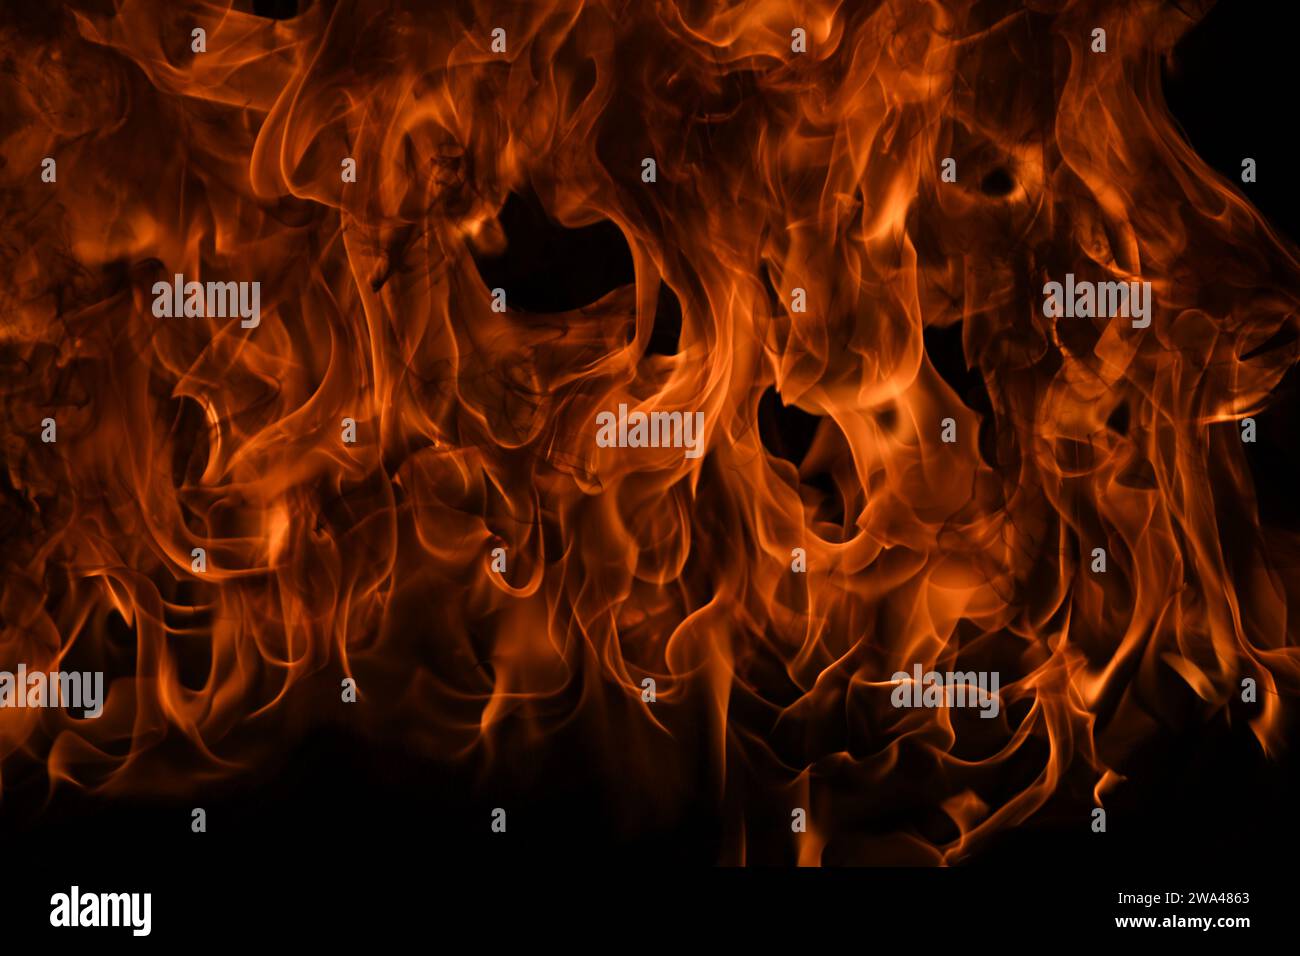 Fire flame motion pattern abstract texture. Burning fire, flame overlay background. Stock Photo